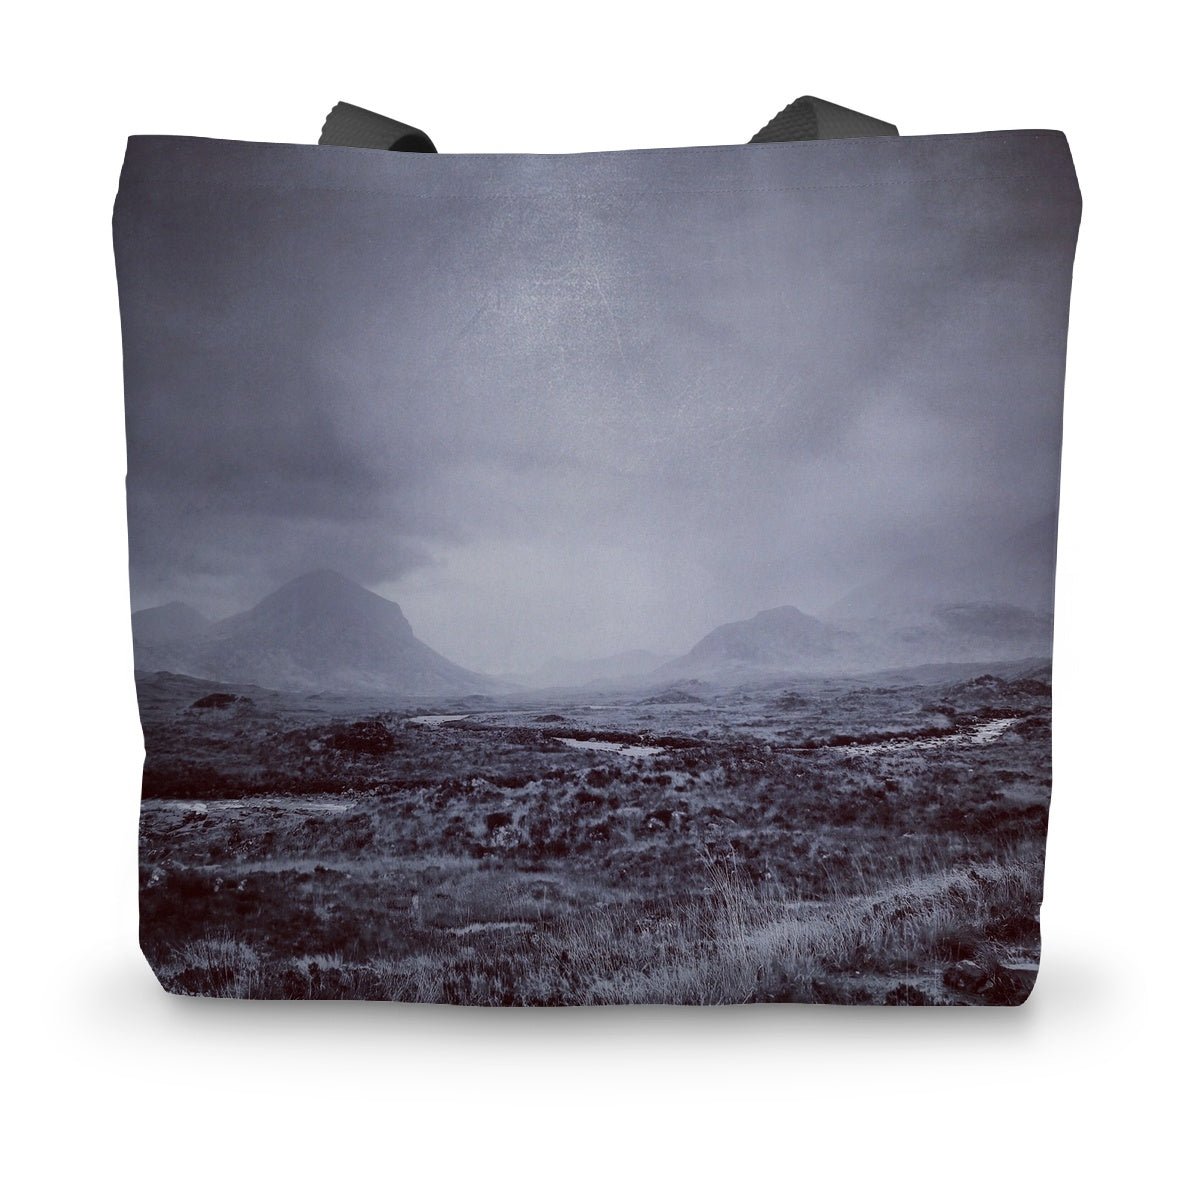 The Brooding Cuillin Skye Art Gifts Canvas Tote Bag-Bags-Skye Art Gallery-14"x18.5"-Paintings, Prints, Homeware, Art Gifts From Scotland By Scottish Artist Kevin Hunter